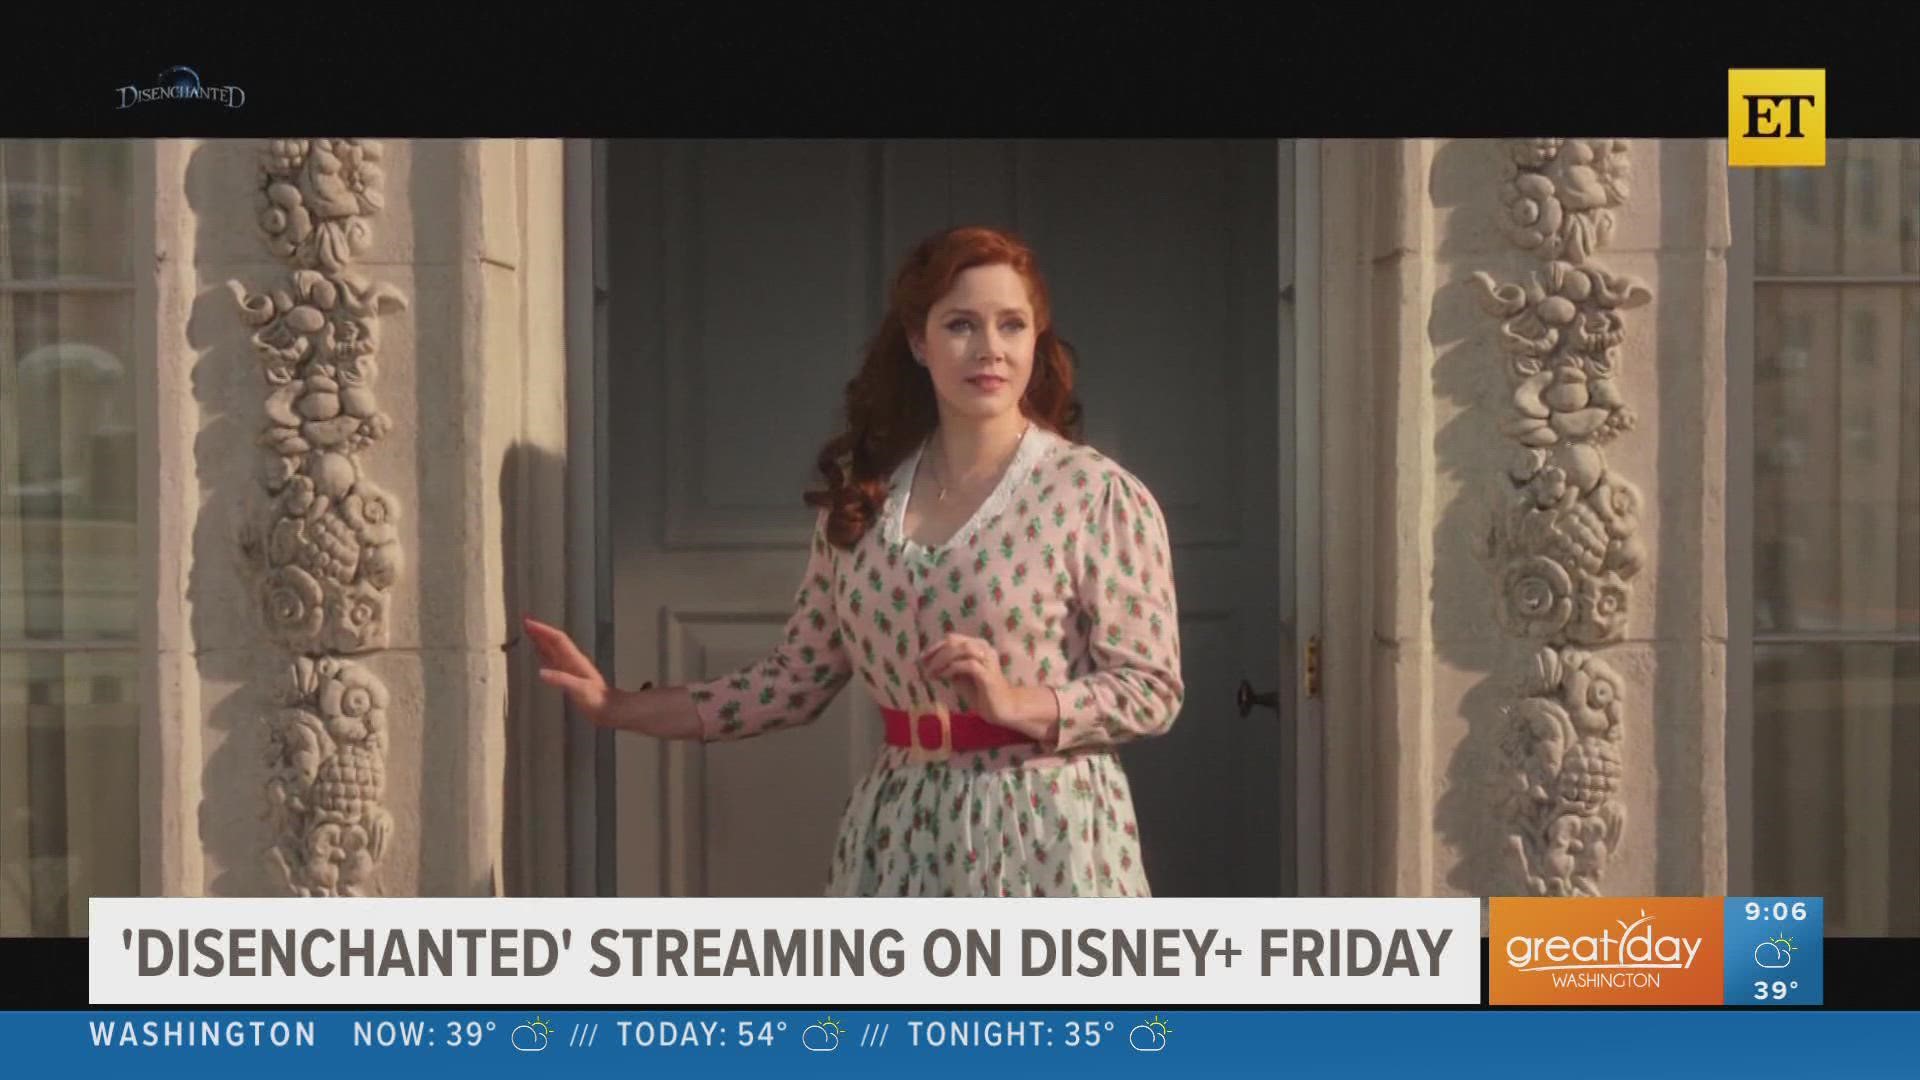 Amy Adams returns for 'Disenchanted', it's the sequel to 'Enchanted'. ET caught up with the cast of the new Disney+ movie.